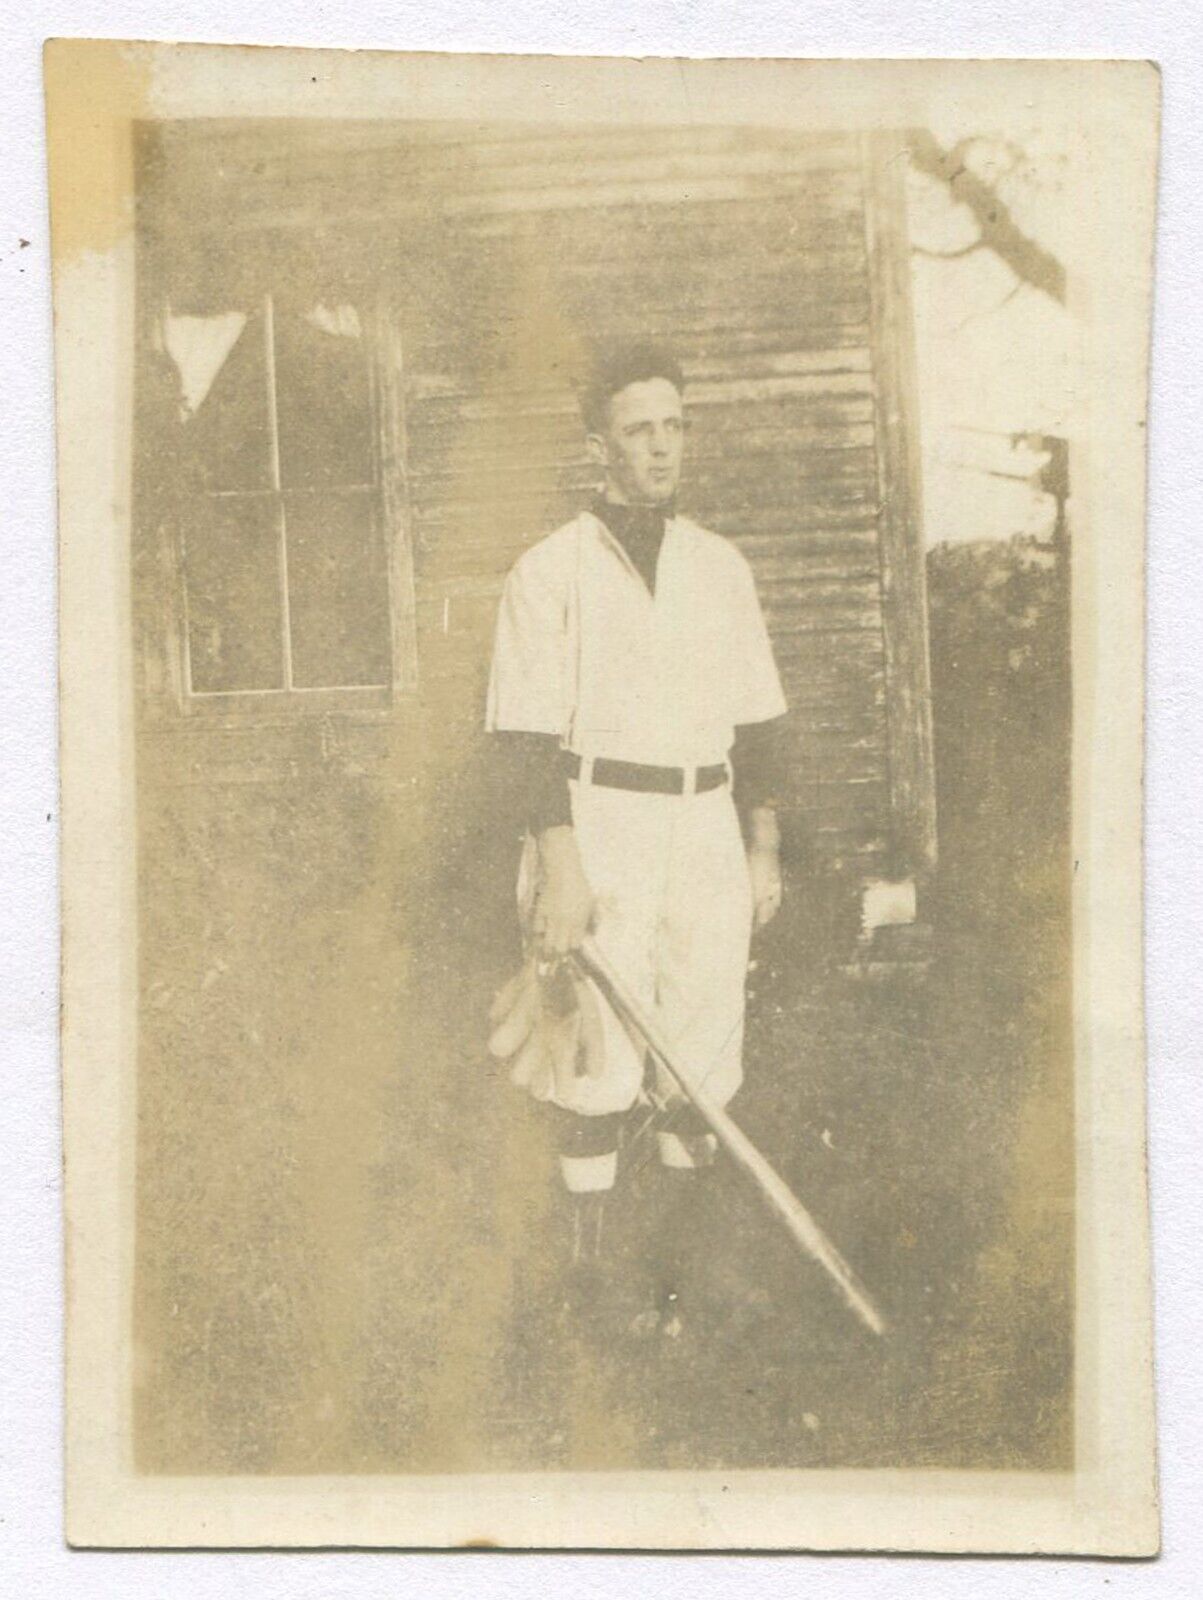 BASEBALL PLAYER IN UNIFORM. TONED SILVER PRINT 3.25X2.25. 1920-30s. 